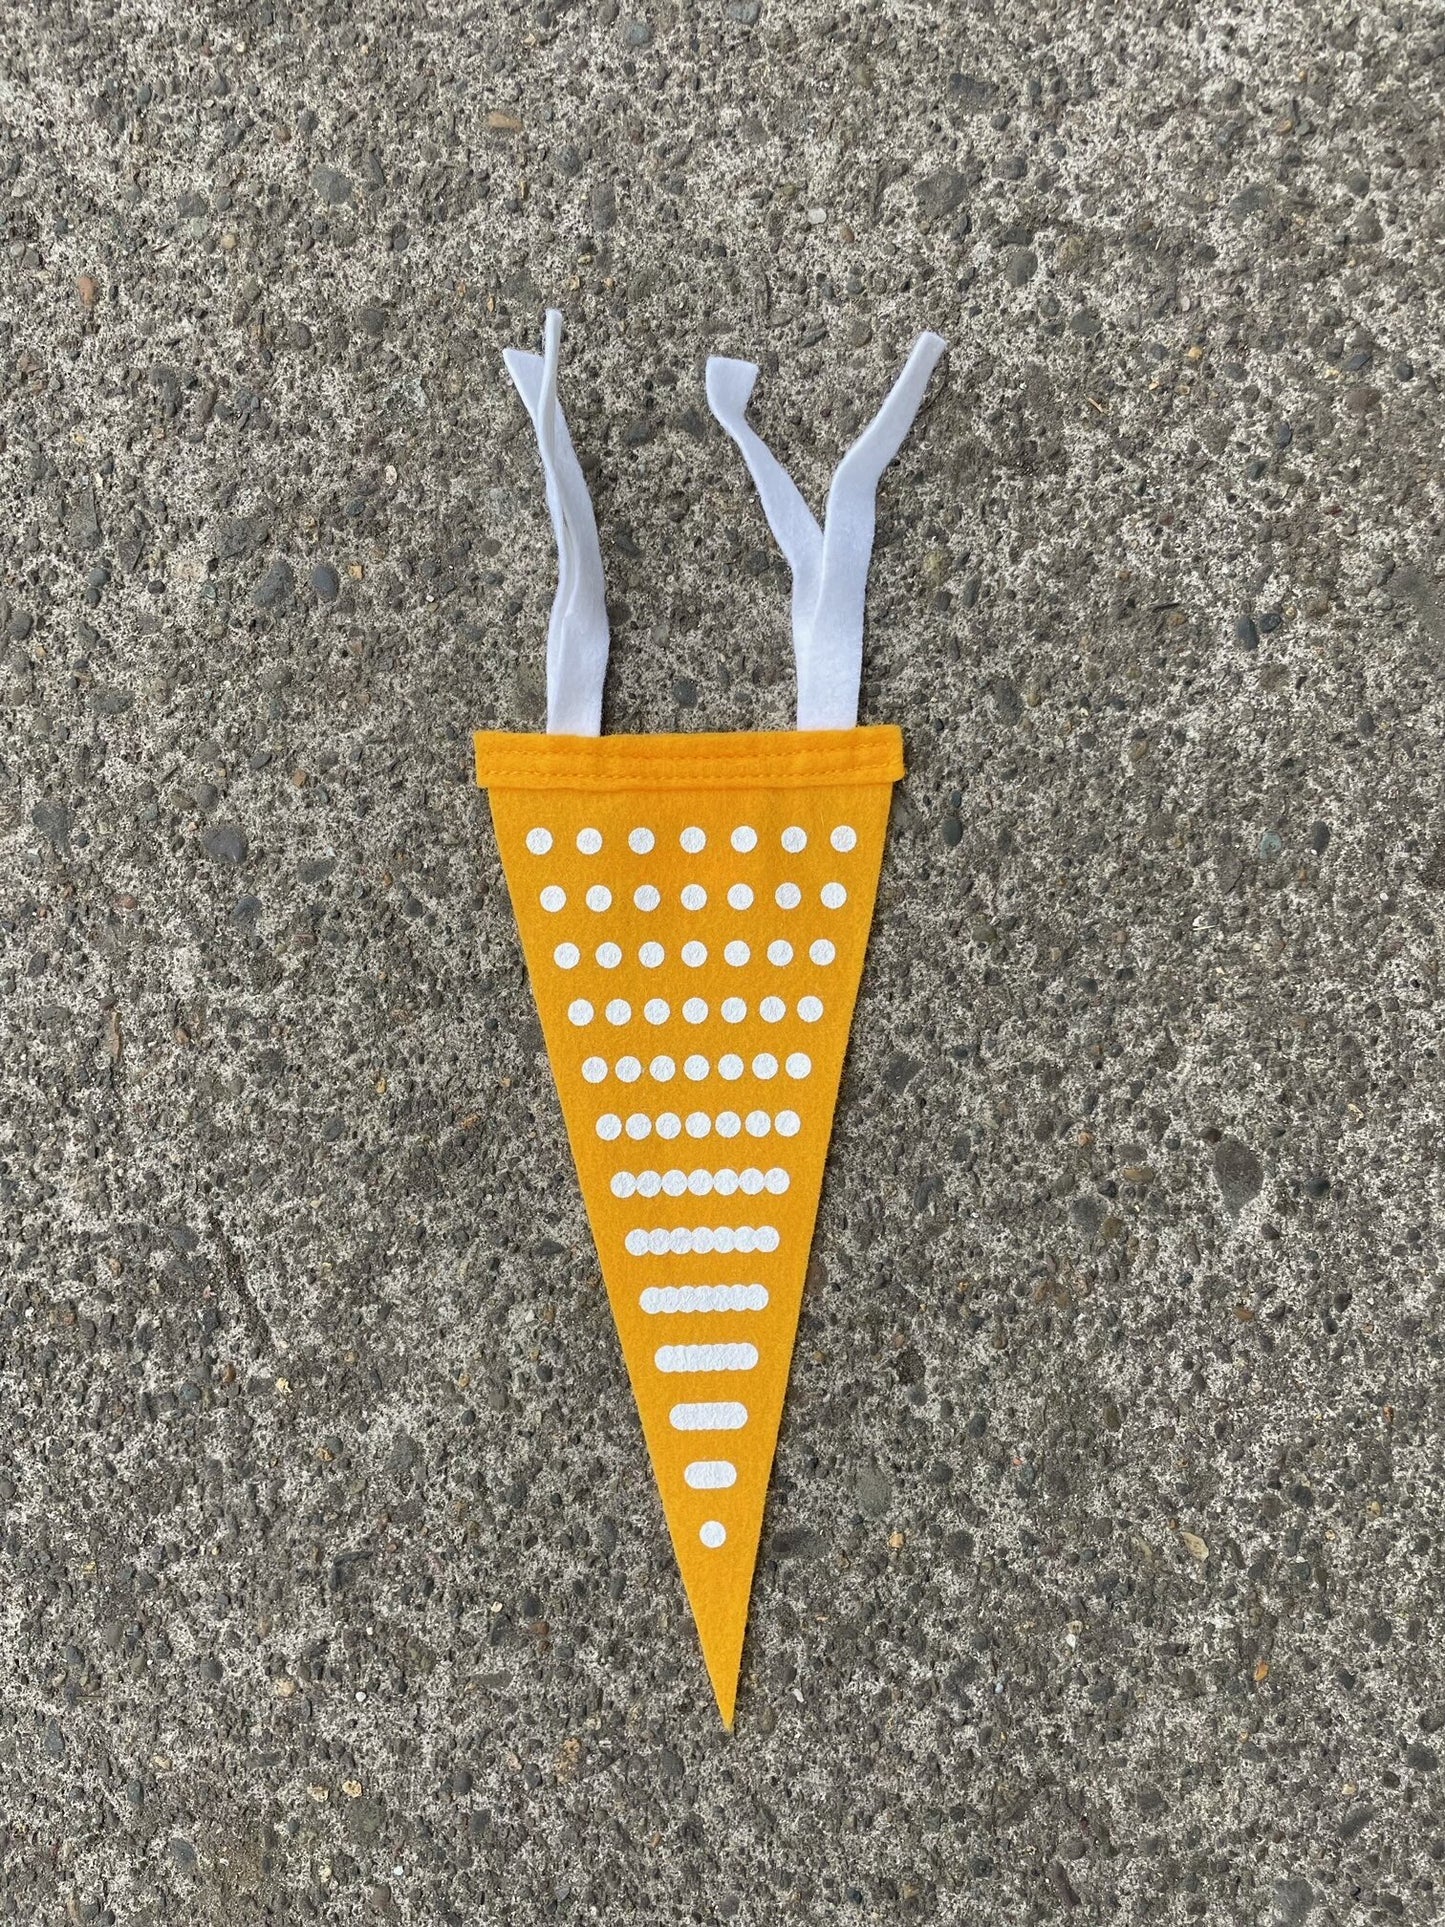 Yellow pennant flag with white dots making a ray pattern